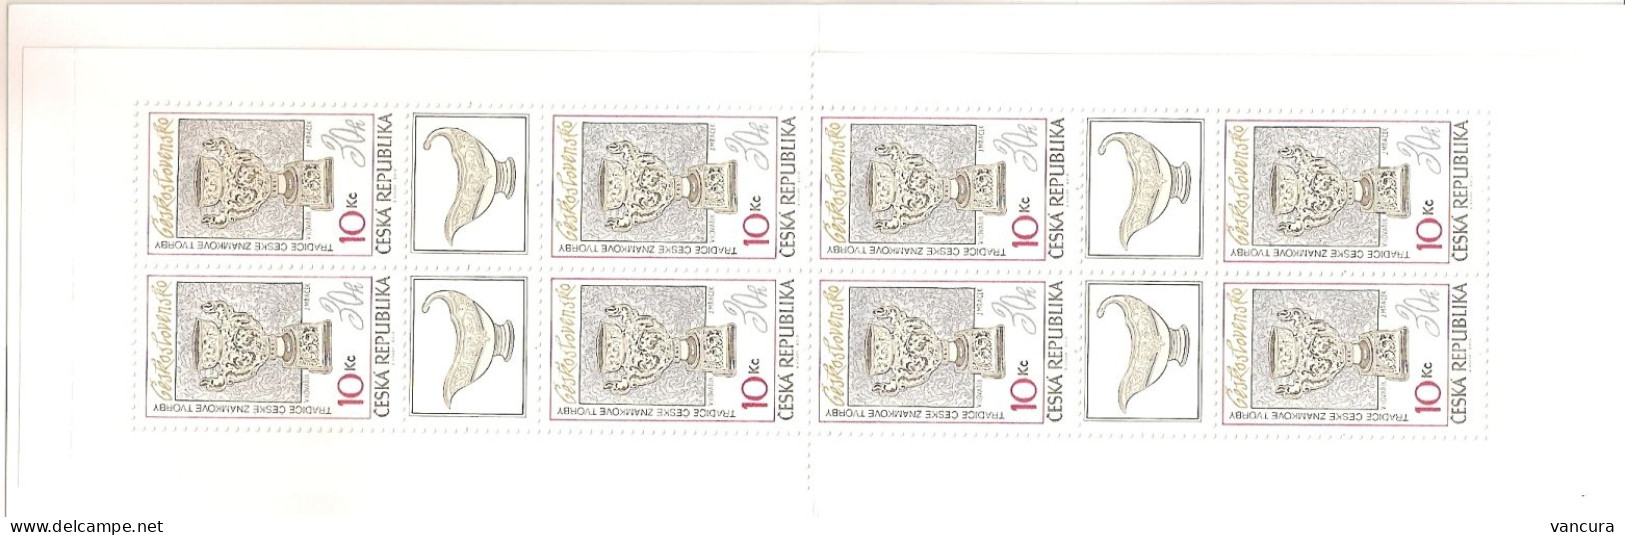 Booklet 619 Czech Republic Traditions Of The Czech Stamp Design 2010 Stamps On Stamps - Porselein